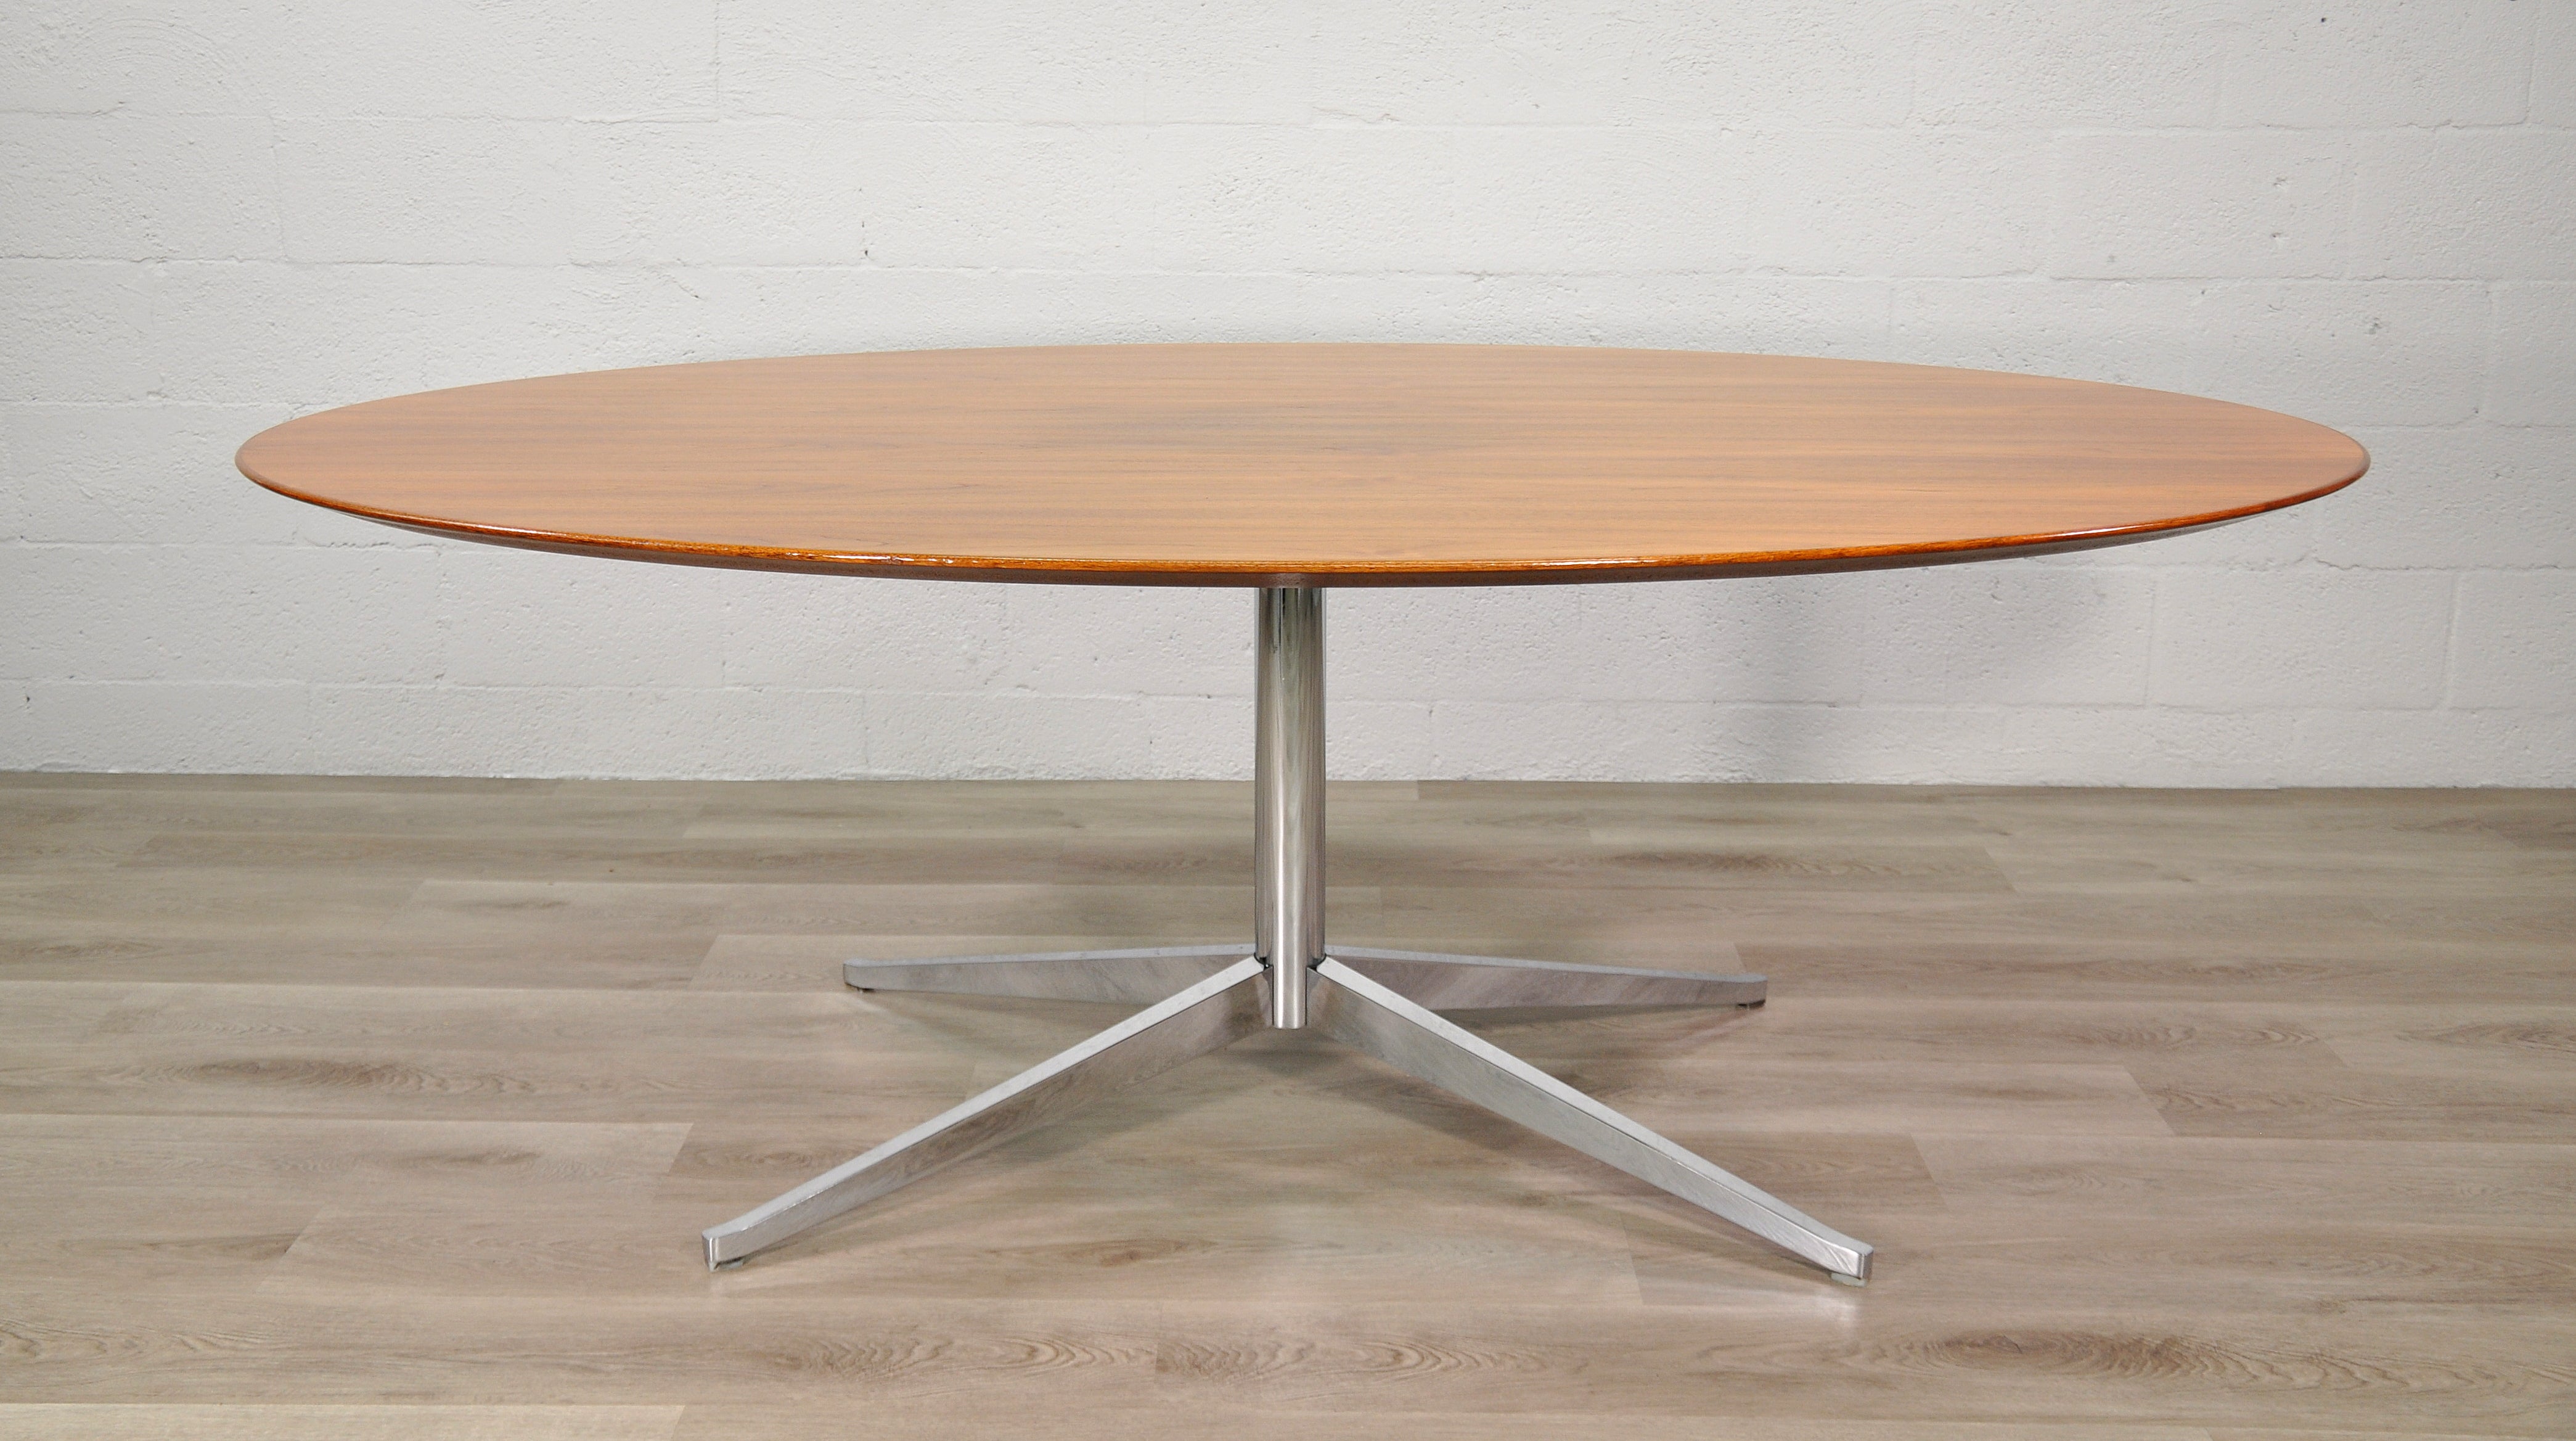 Versatile 2480 pedestal table desk designed by Florence Knoll for Knoll International in the United States, dating from the 1960s. This iconic design features a solid oval walnut wood top that sits over a welded steel base with polished chromed